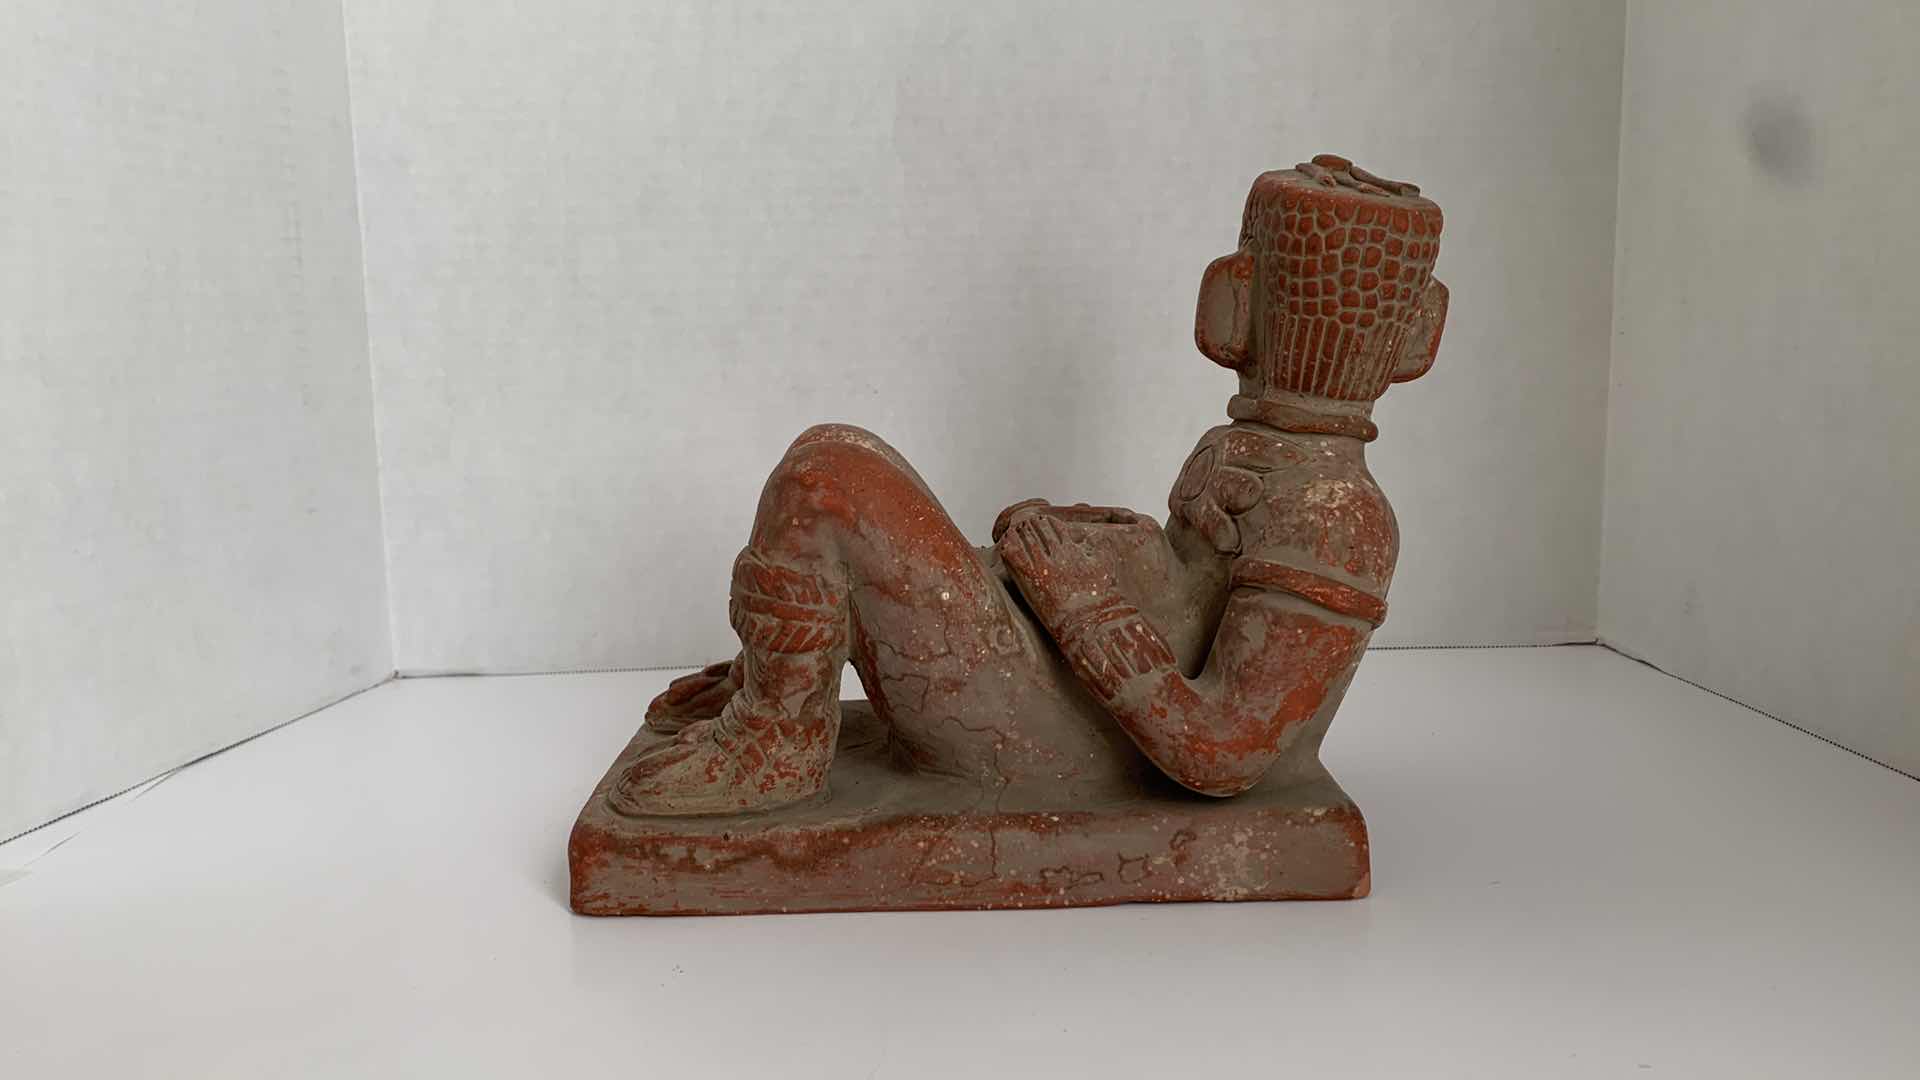 Photo 4 of REPLICA CHACMOOL CLAY STATUE 10” X 5” H 9”